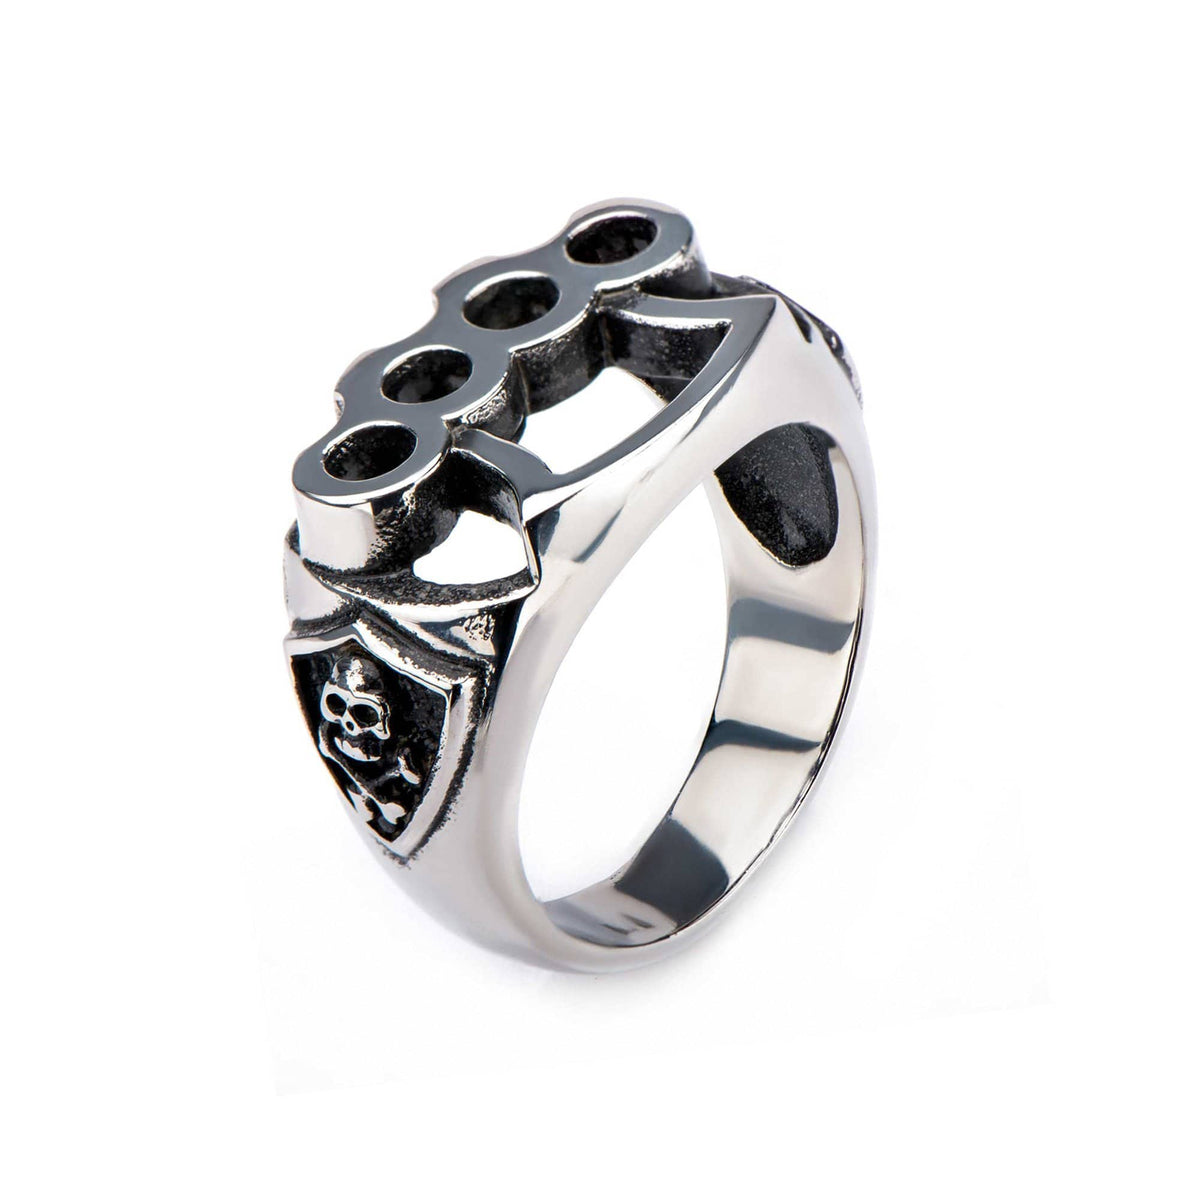 INOX JEWELRY Rings Black and Silver Tone Stainless Steel Knuckle Bolt and Skull Ring